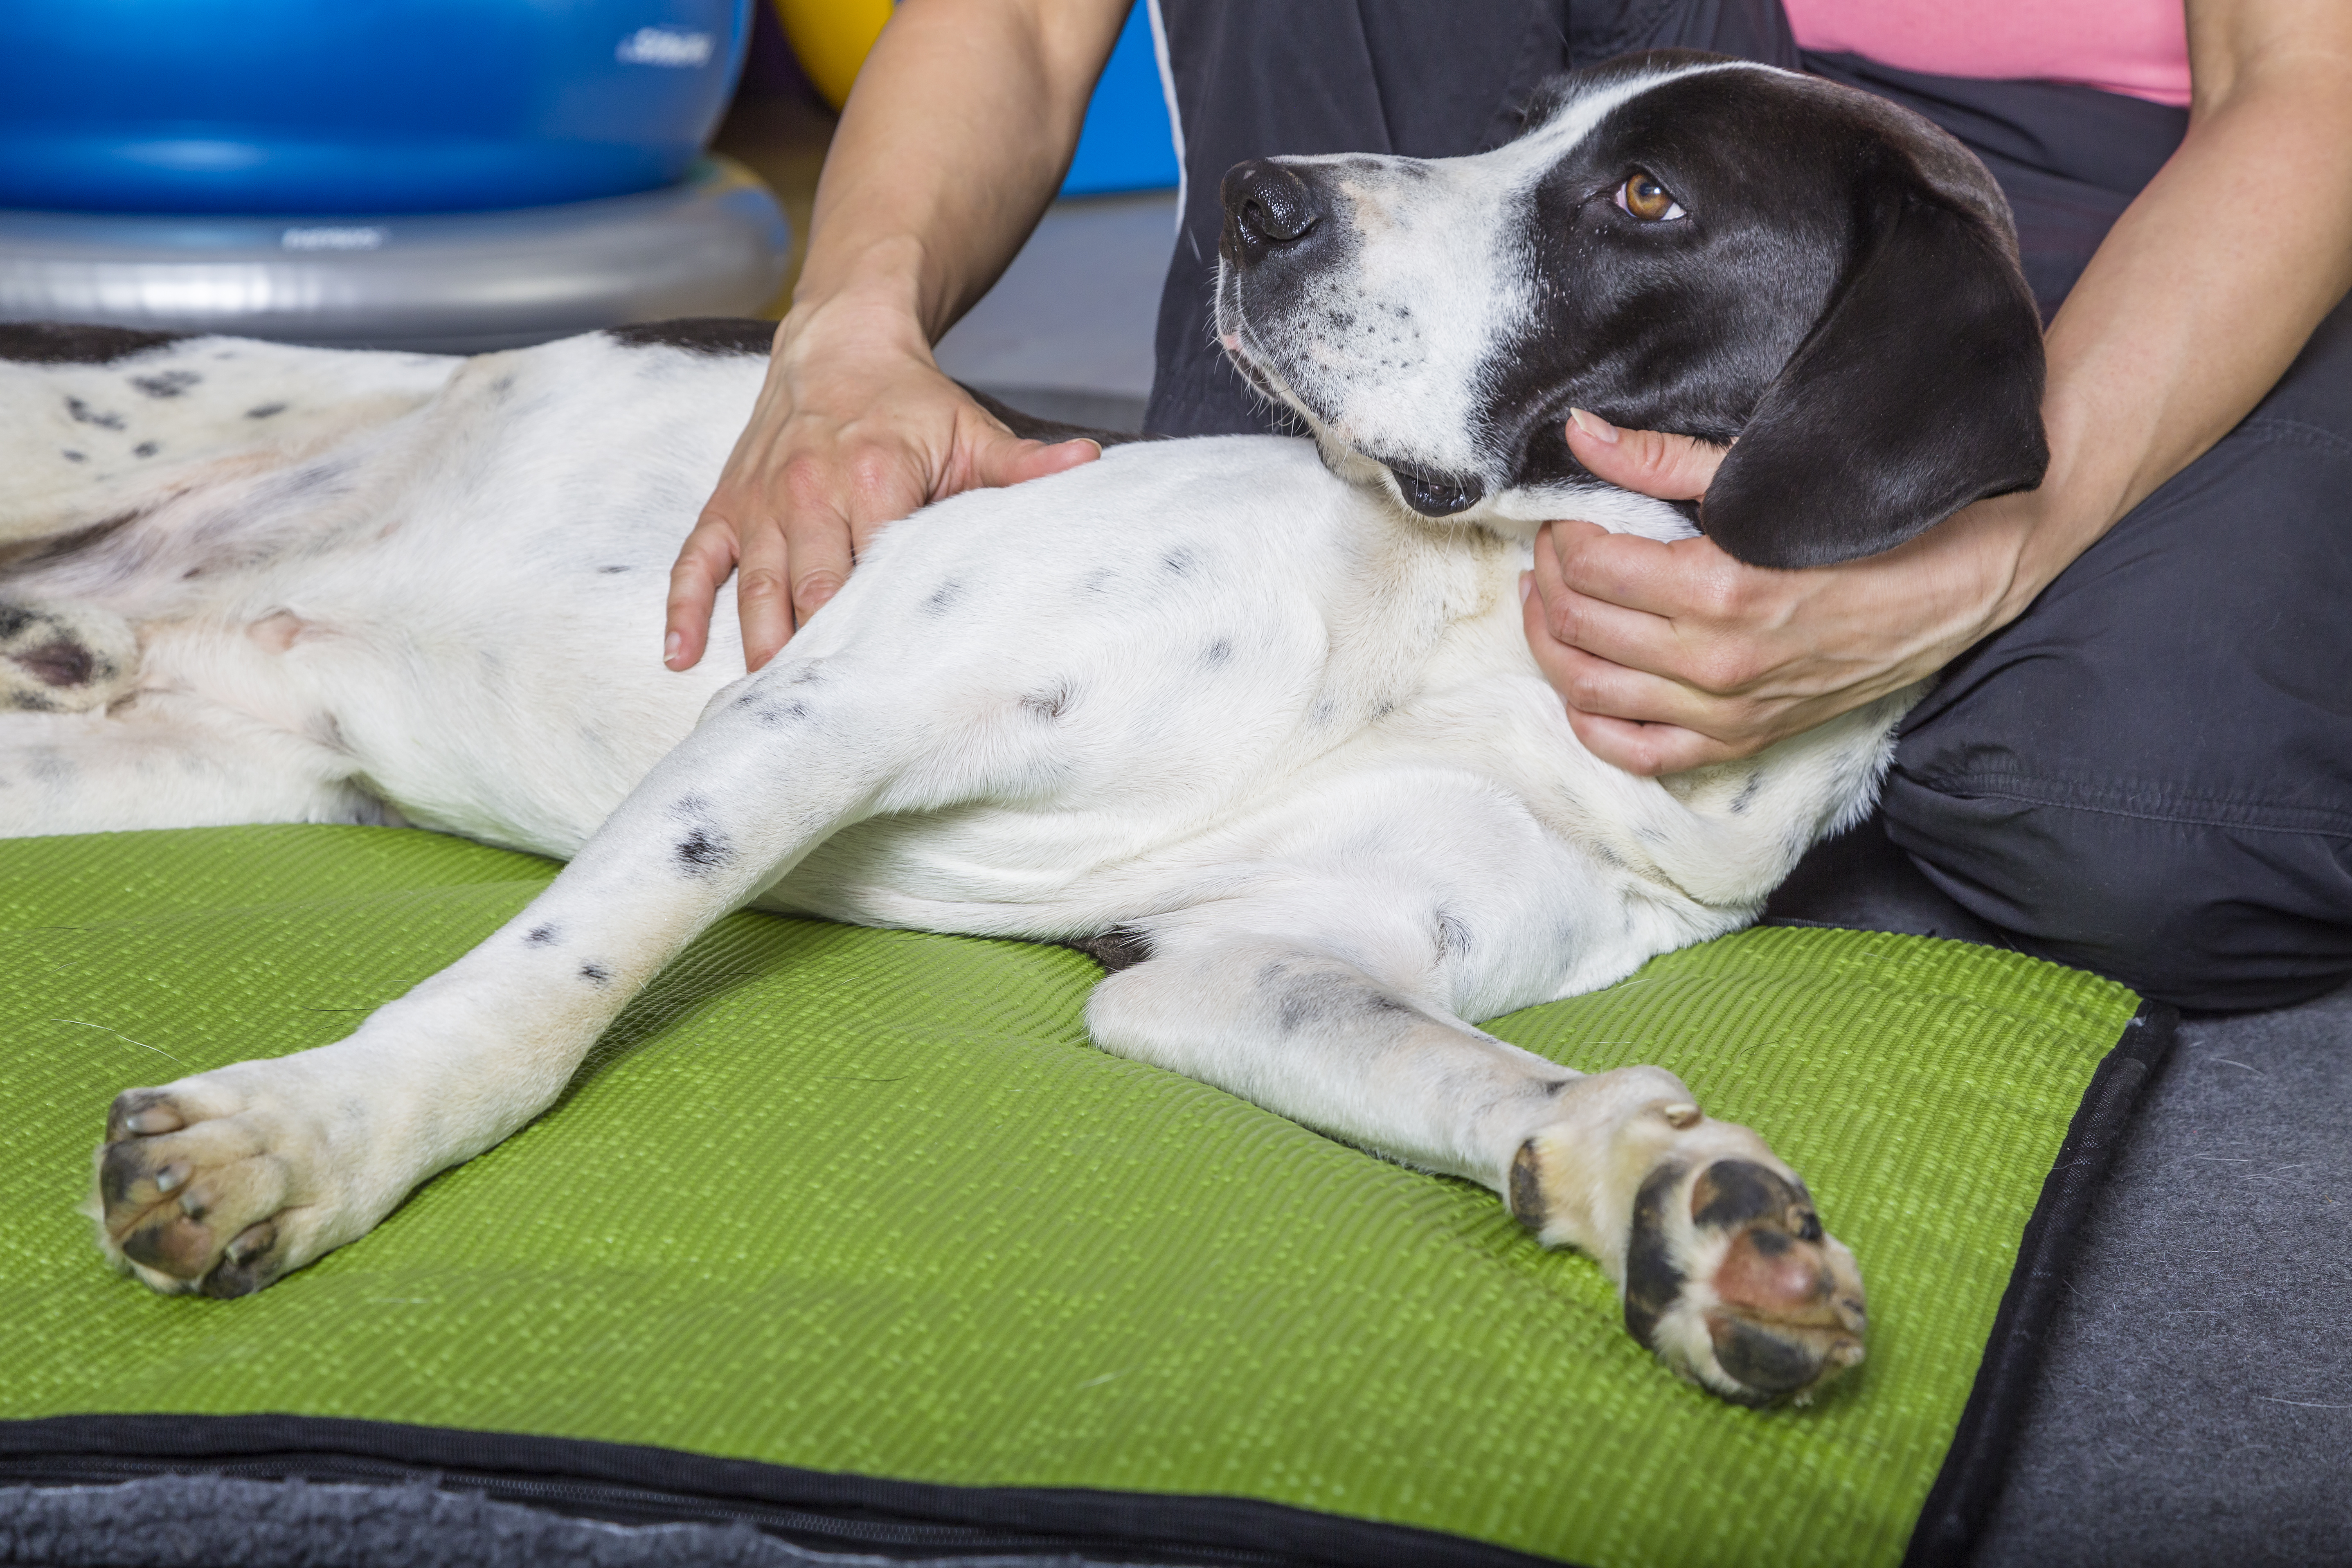 Hands on dog as he lies on his side as part of understanding veterinary orthotics and prosthetics